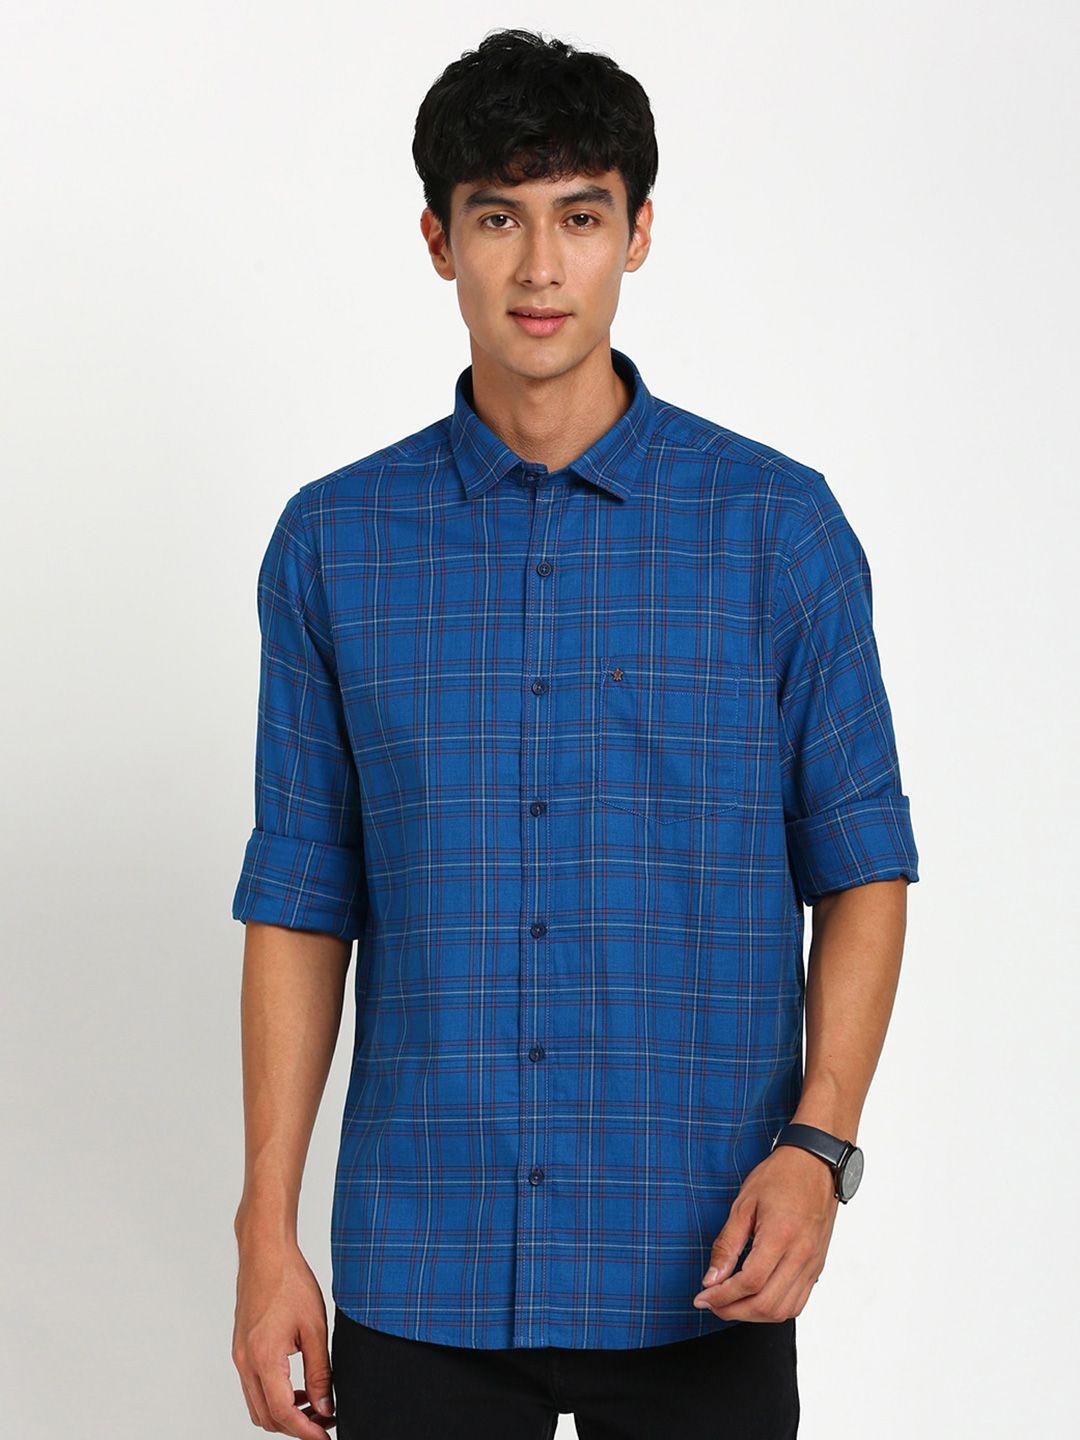 turtle relaxed slim fit tartan checked pure cotton casual shirt